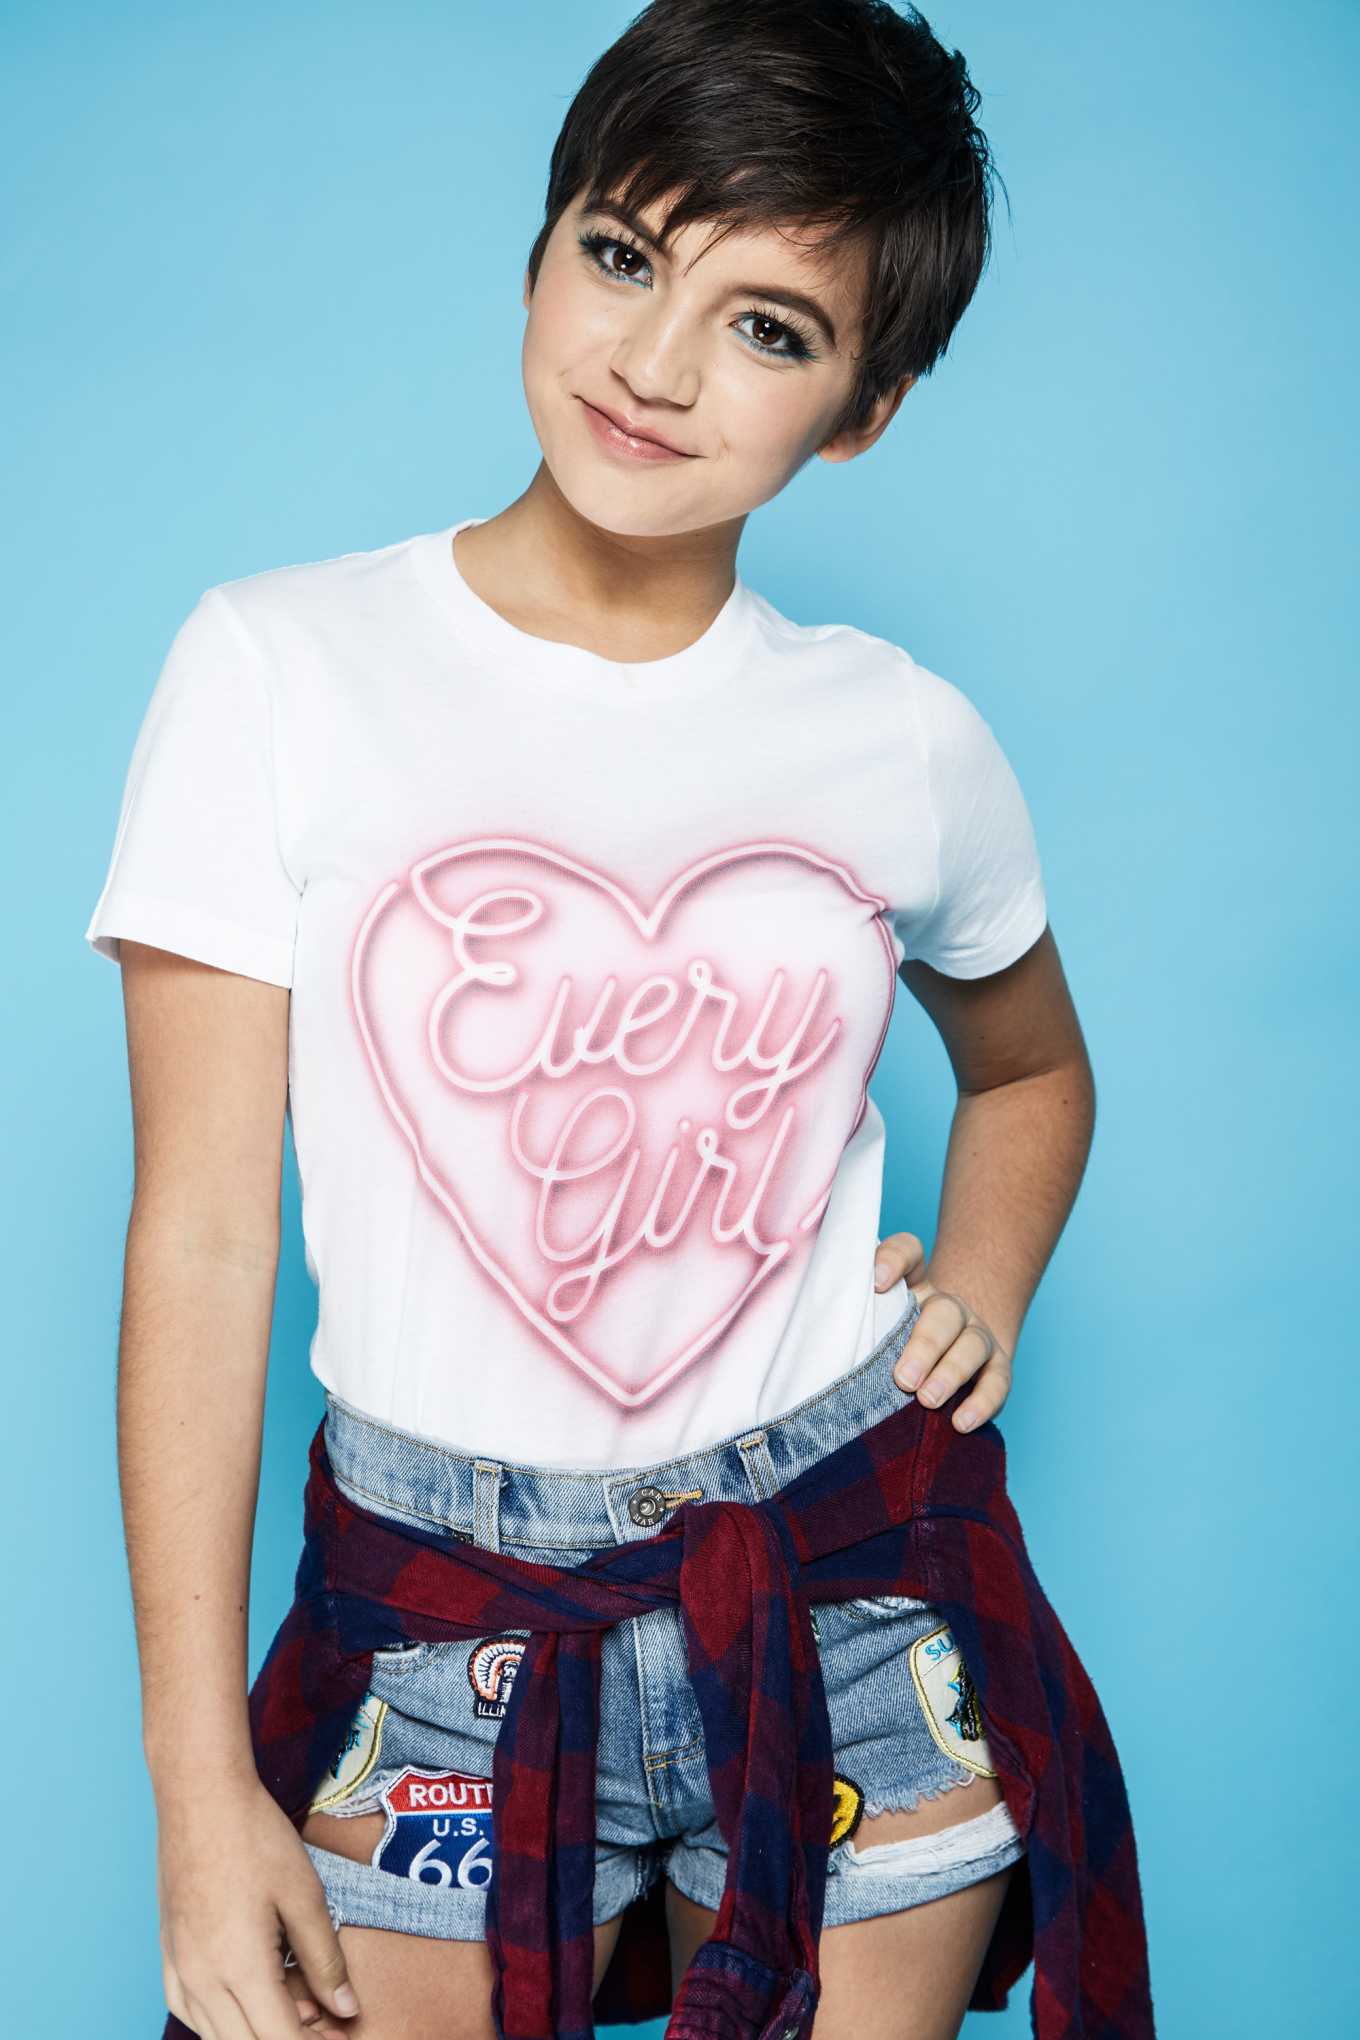 Isabela Moner â€“ EveryGirl Campaign by Will Navarro 2017